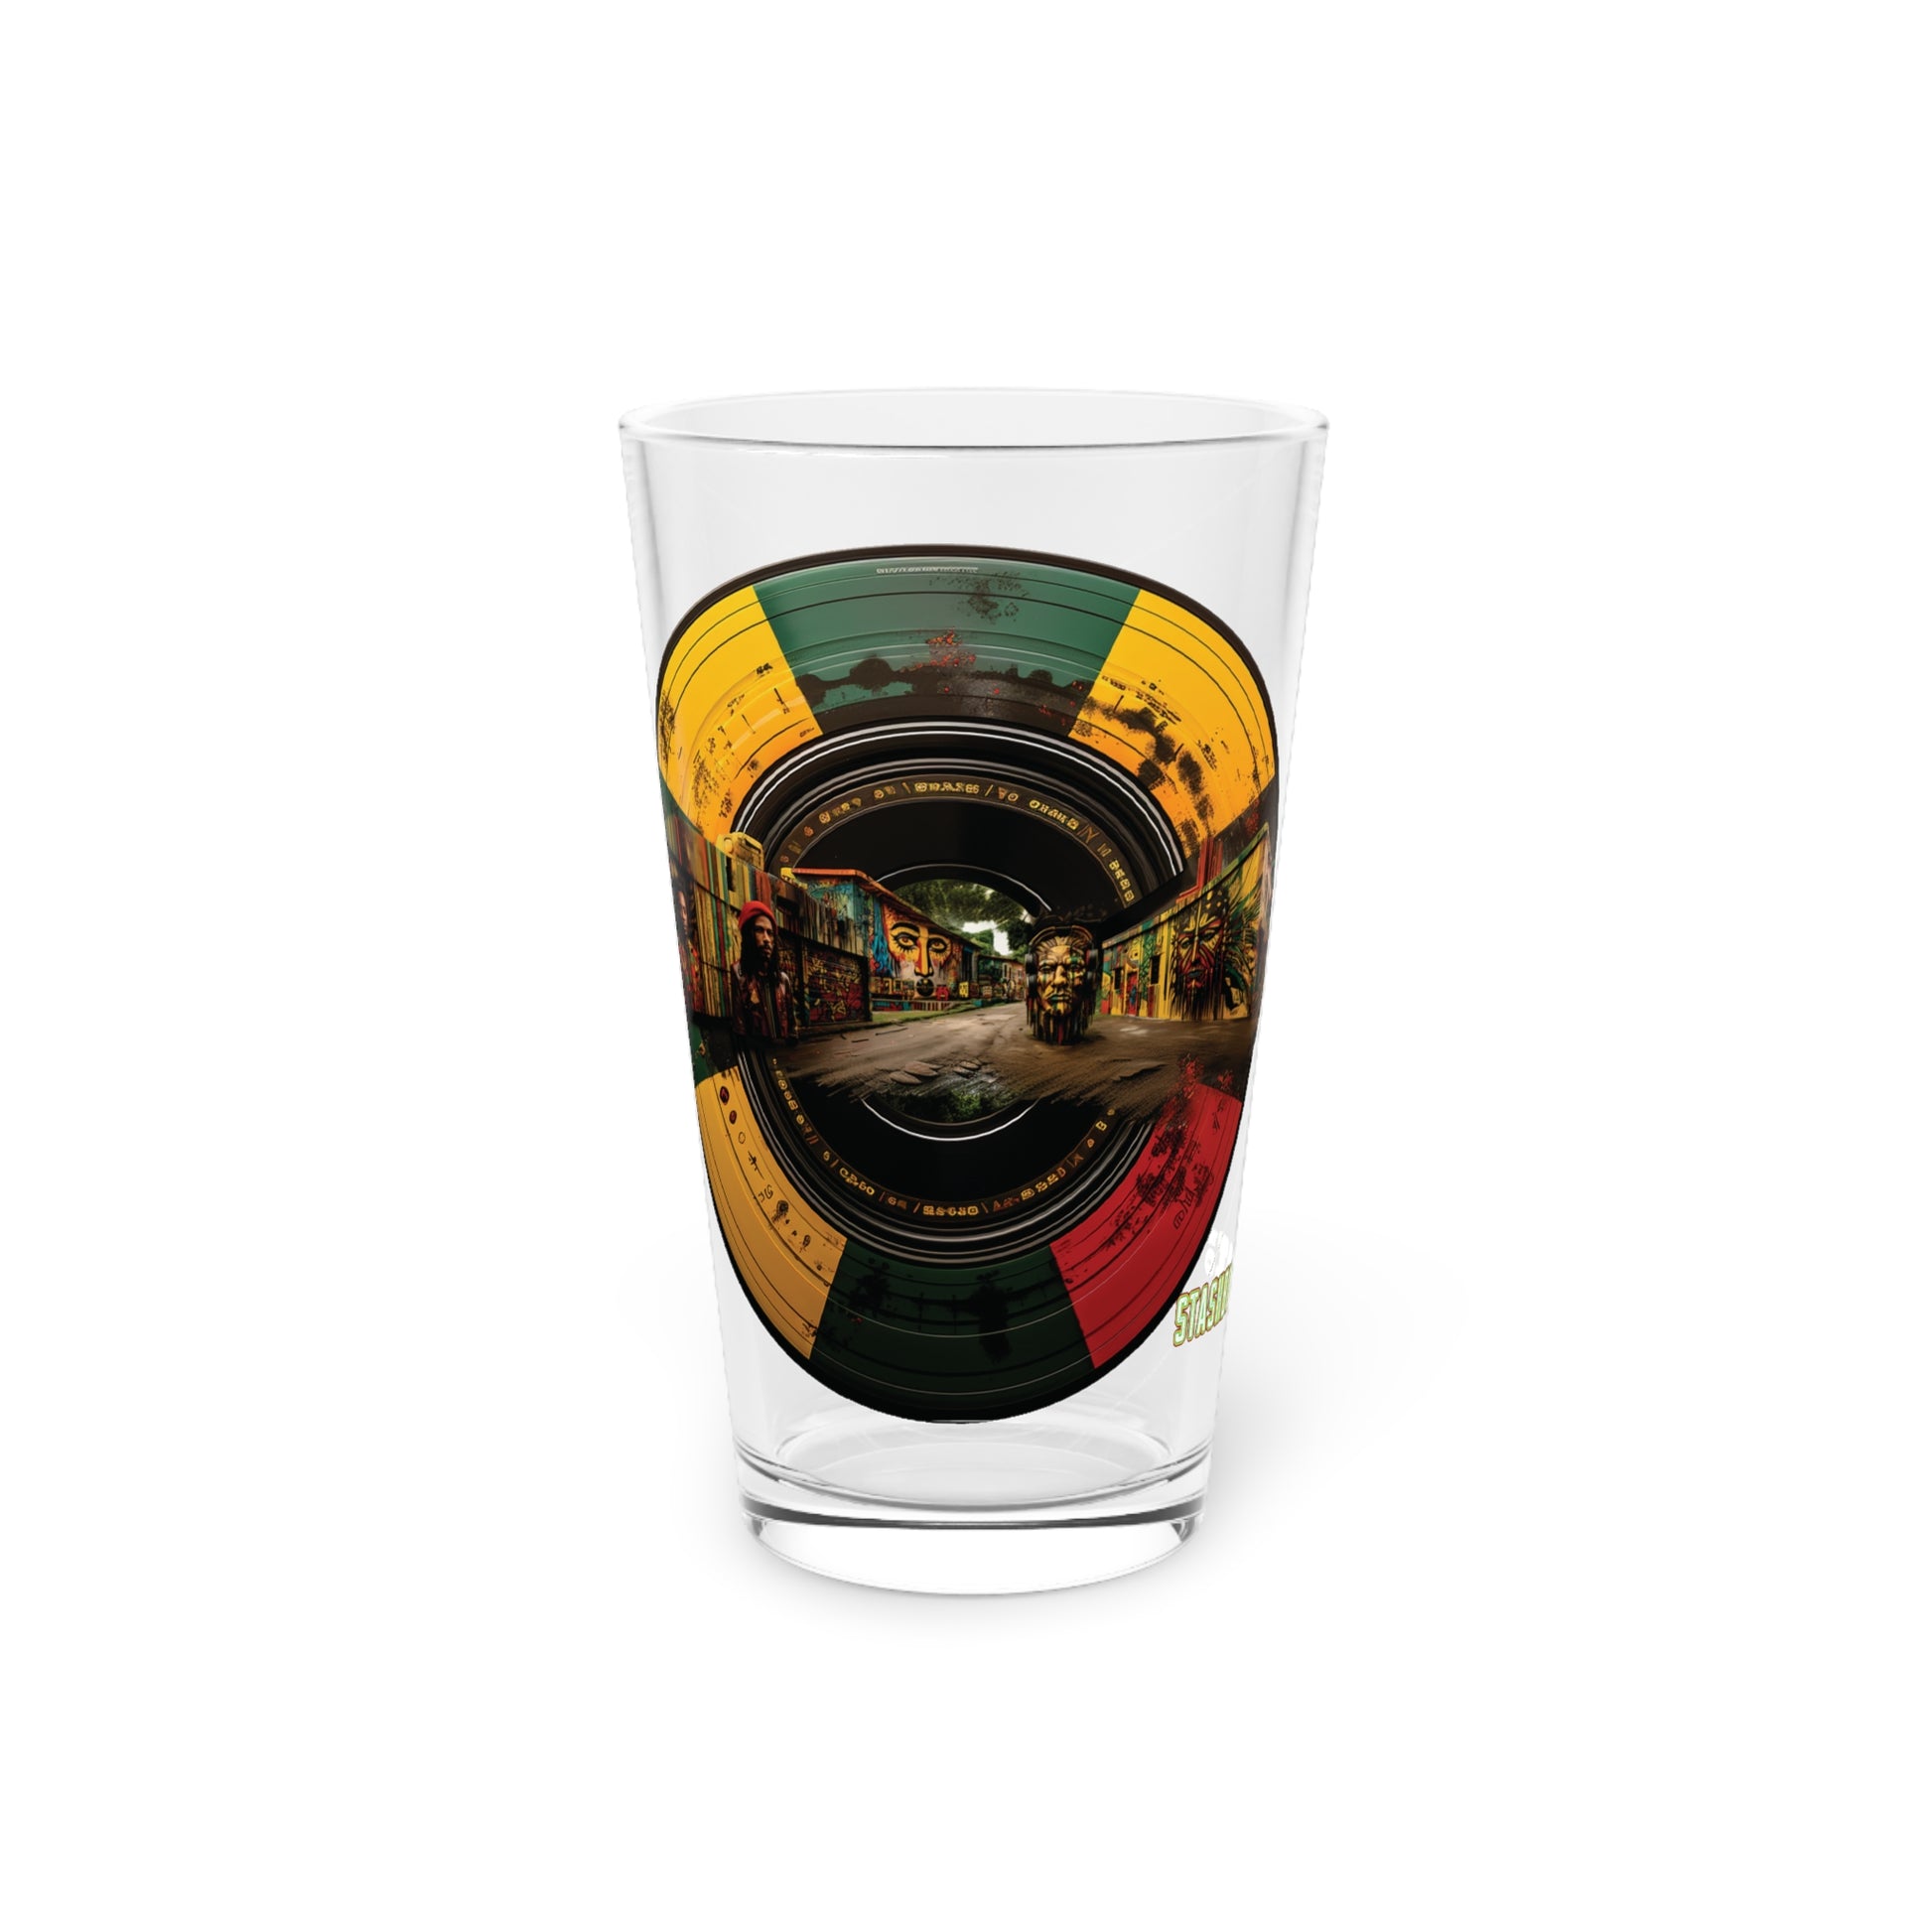 Pour in the Reggae Vibes with our Psychedelic Design #005 Pint Glass. Groove in every sip, exclusively at Stashbox.ai.